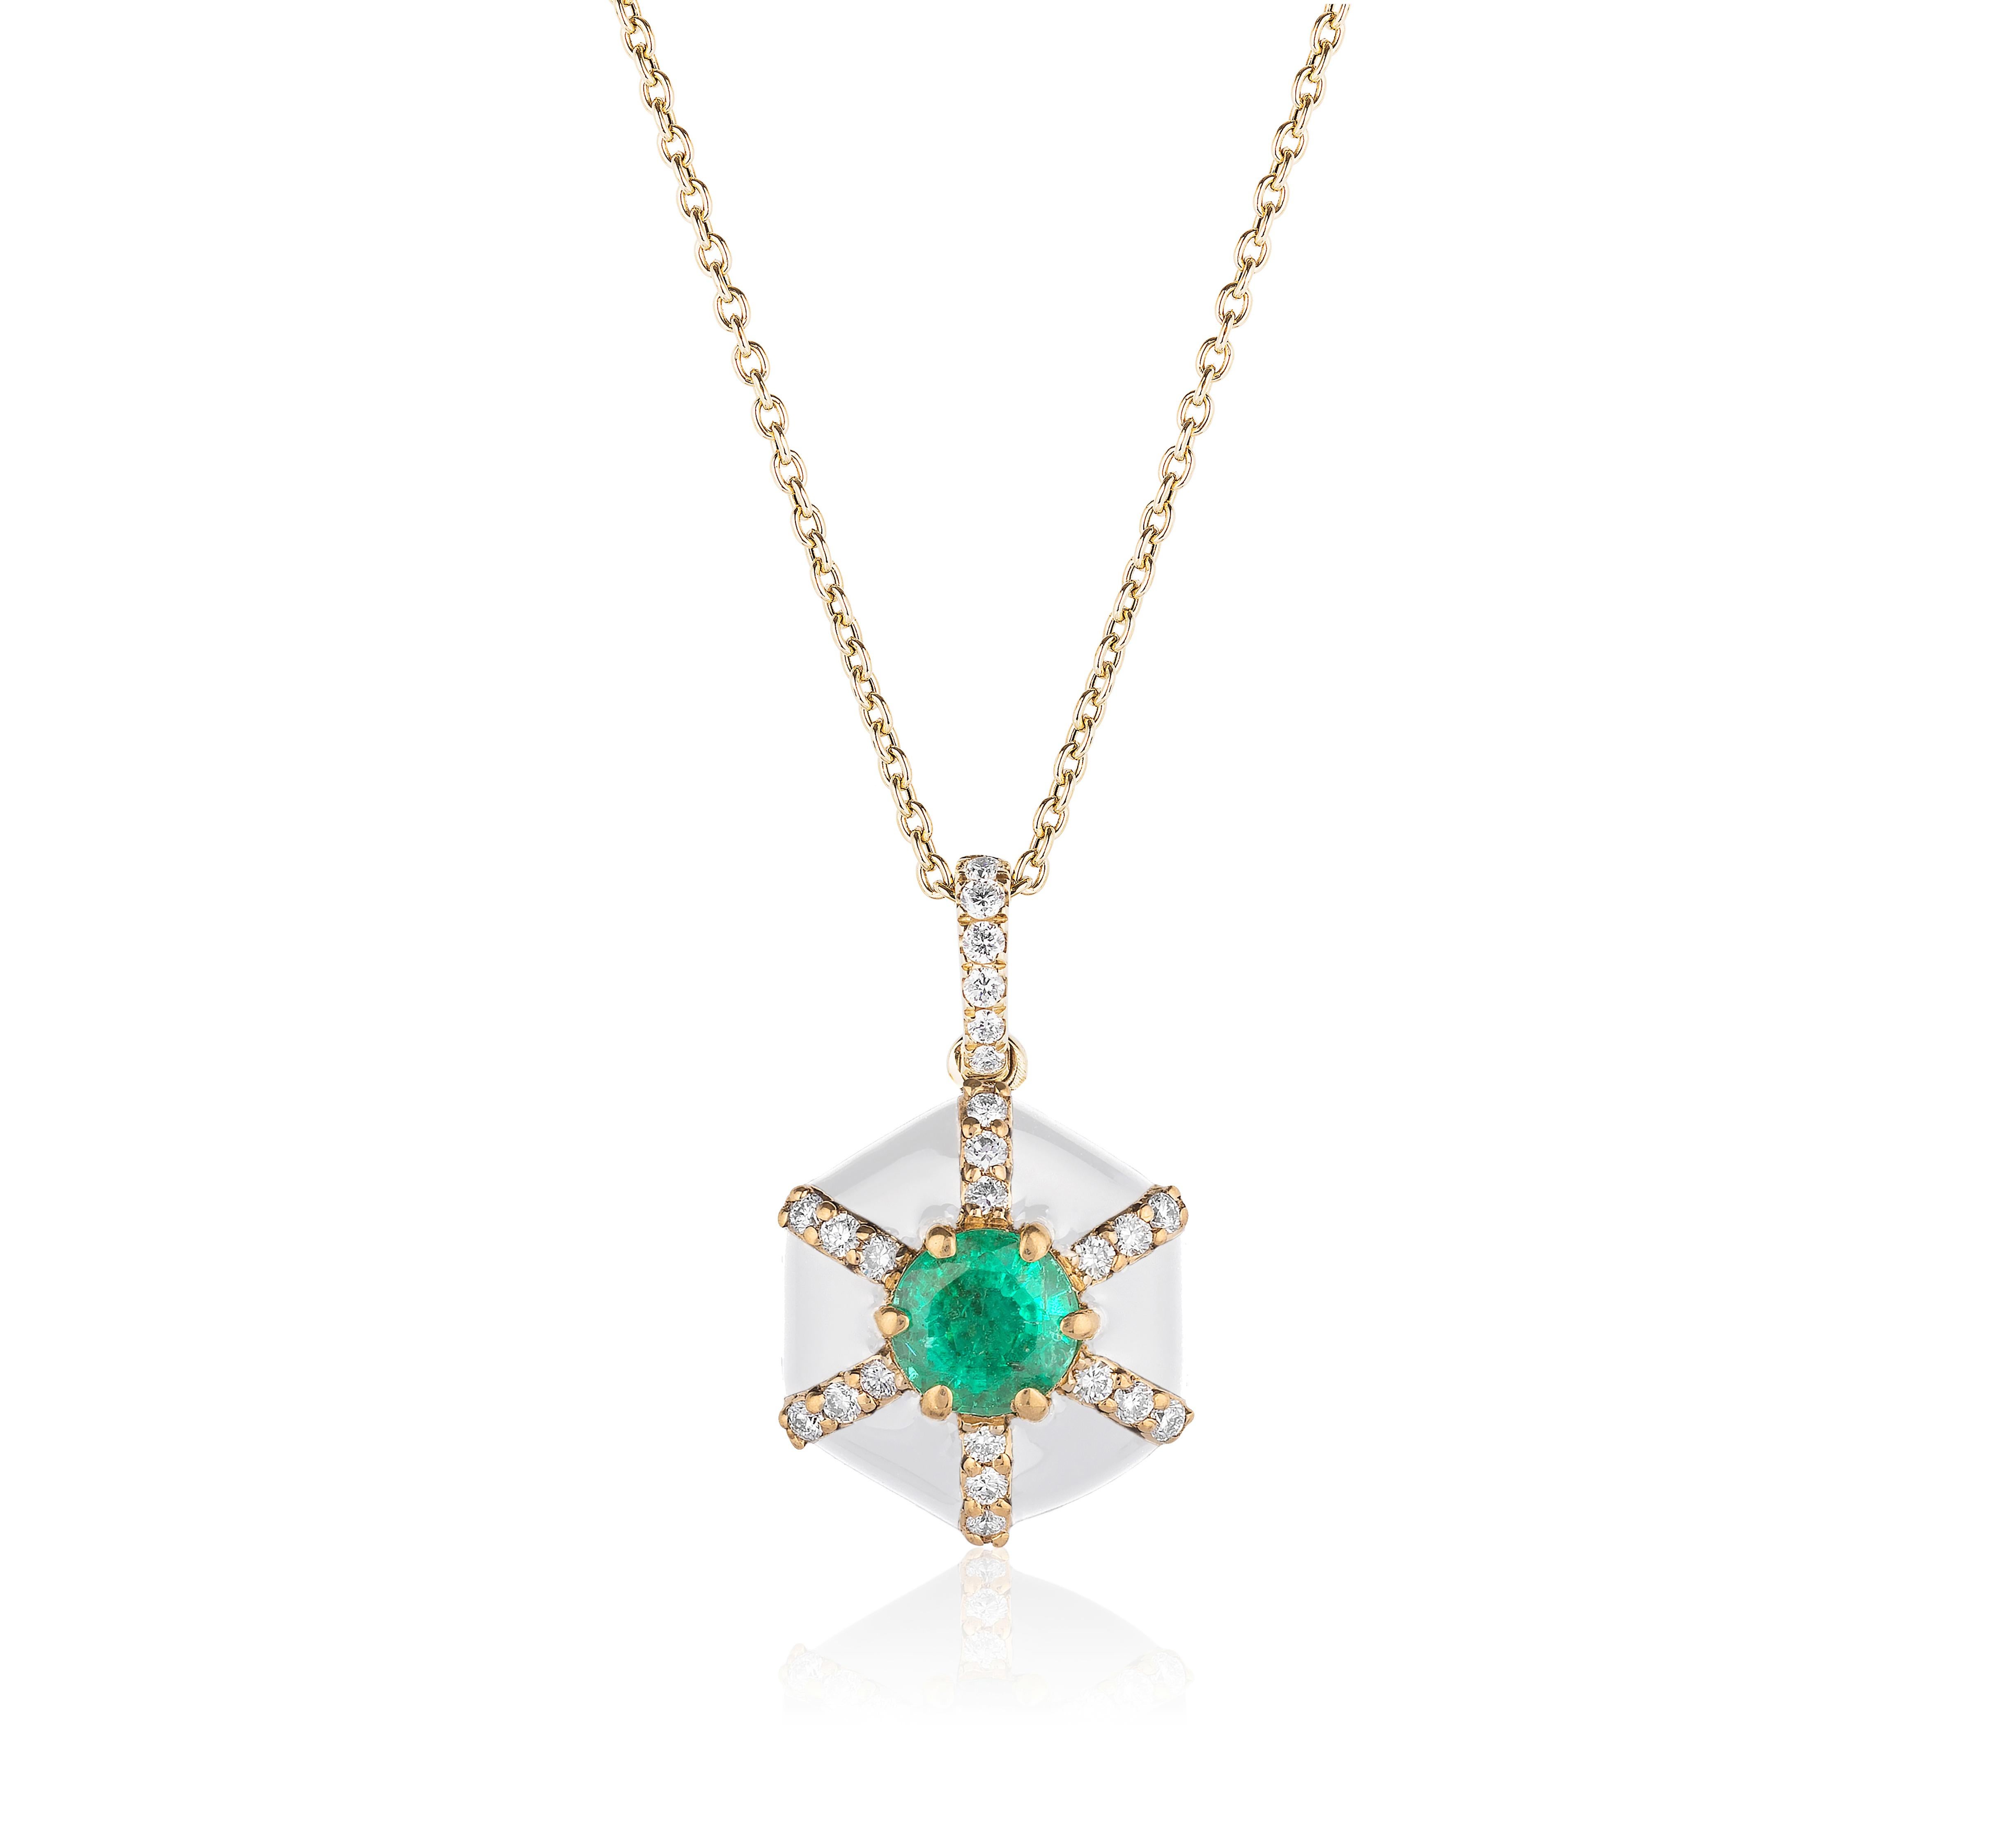 'Queen' Hexagon White Enamel Pendant with Emerald And Diamond in 18K Yellow Gold.
Stone Size: 5 x 3 mm 
Gemstone Approx. Stone Wt: 0.21 Carats 
Diamonds: G-H / VS, Approx. Wt: 0.09 Carats